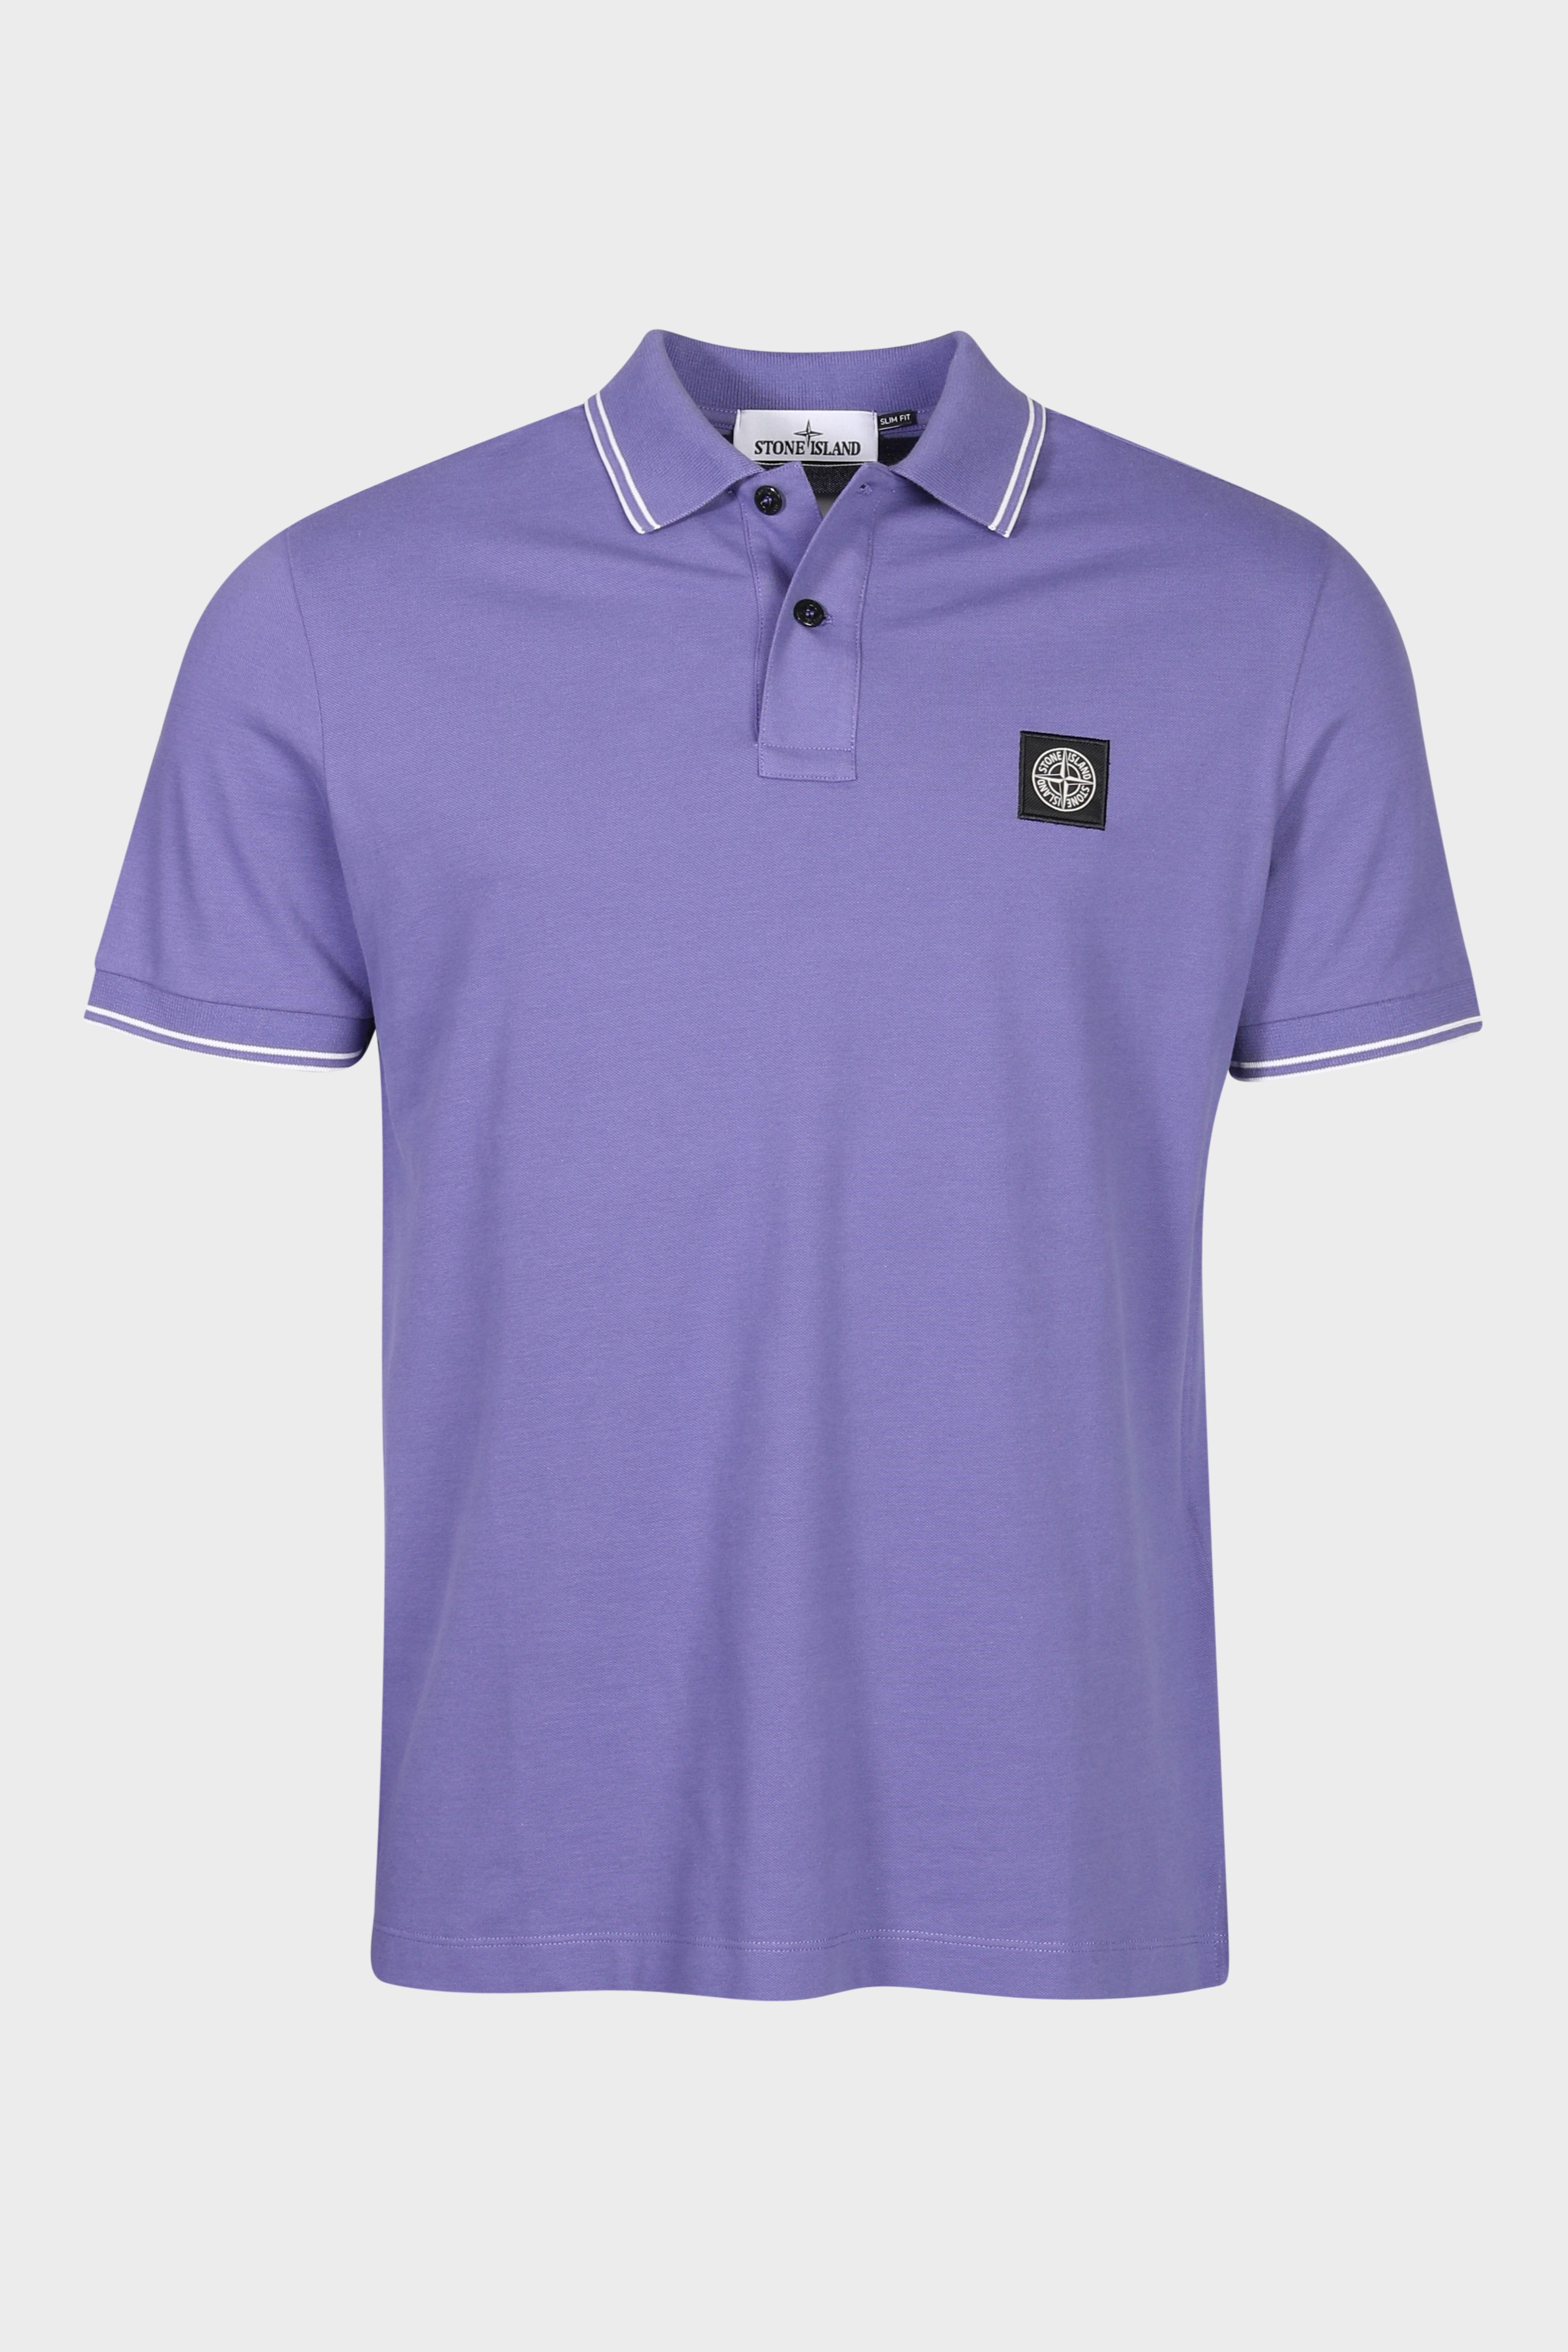 STONE ISLAND Slim Fit Polo Shirt in Lilac L